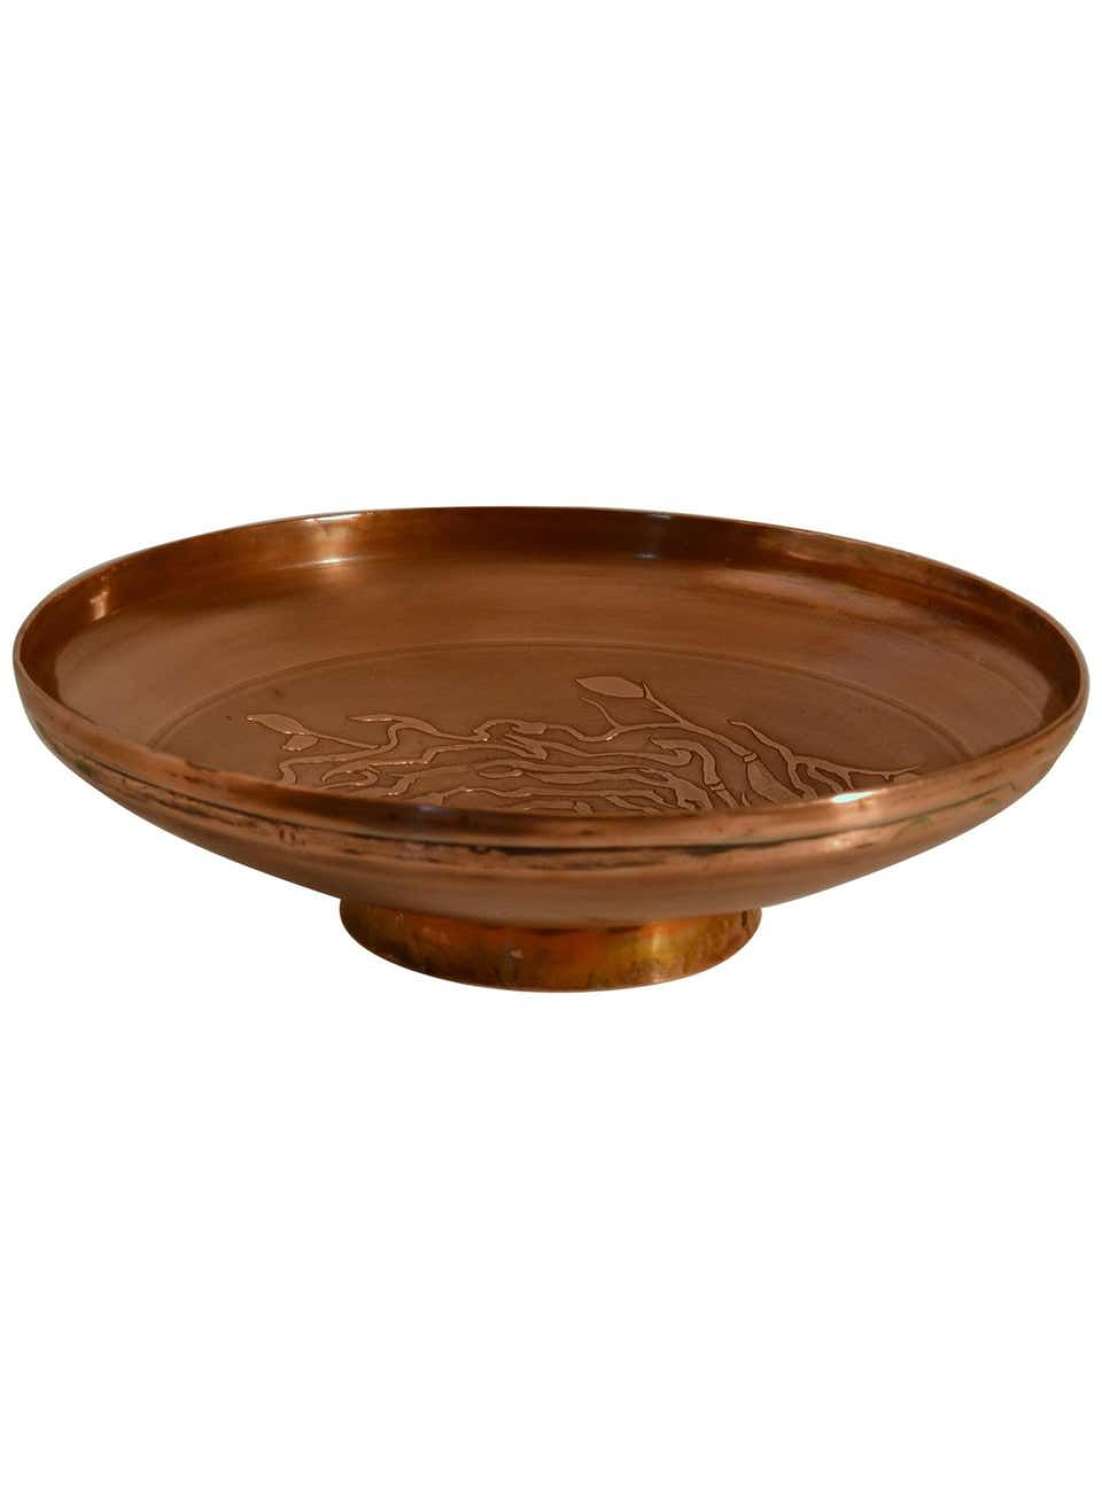 Large Decorative Copper Bowl with Etched Motive, 1950s